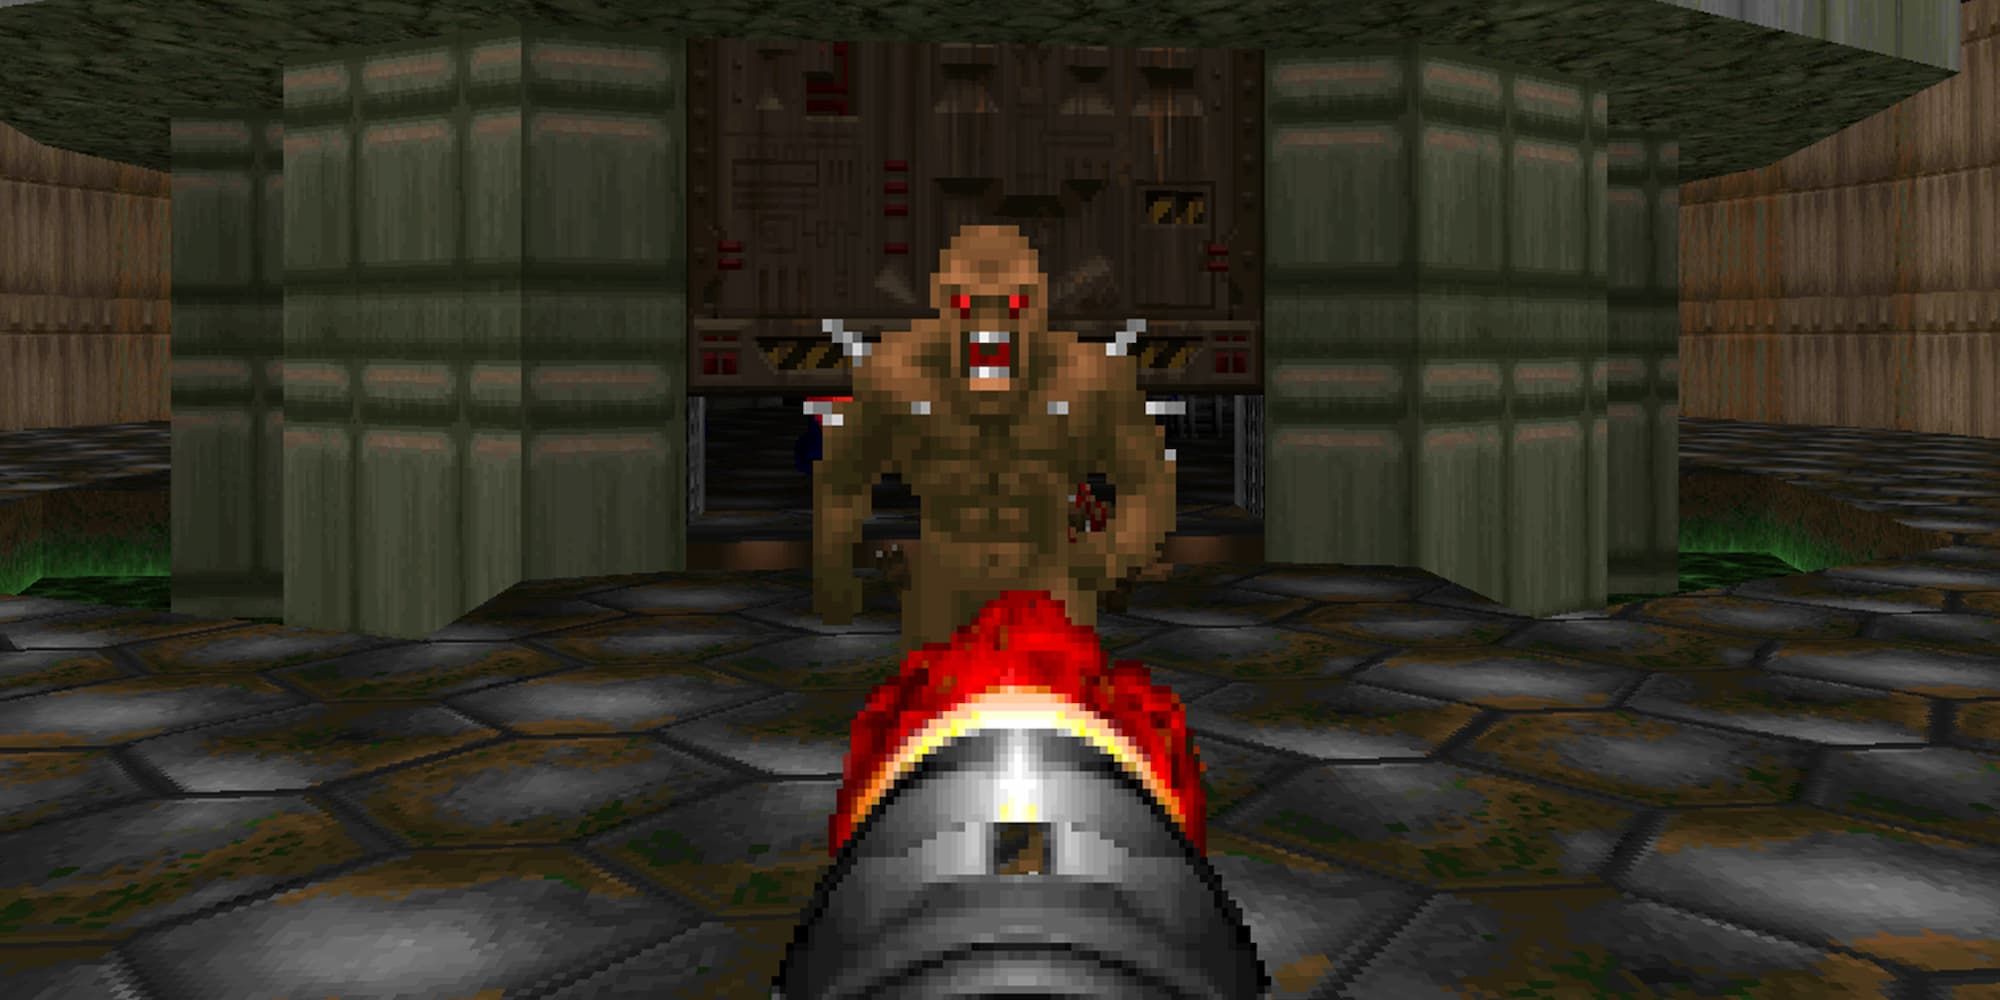 The player launches a rocket at a demon in Doom.